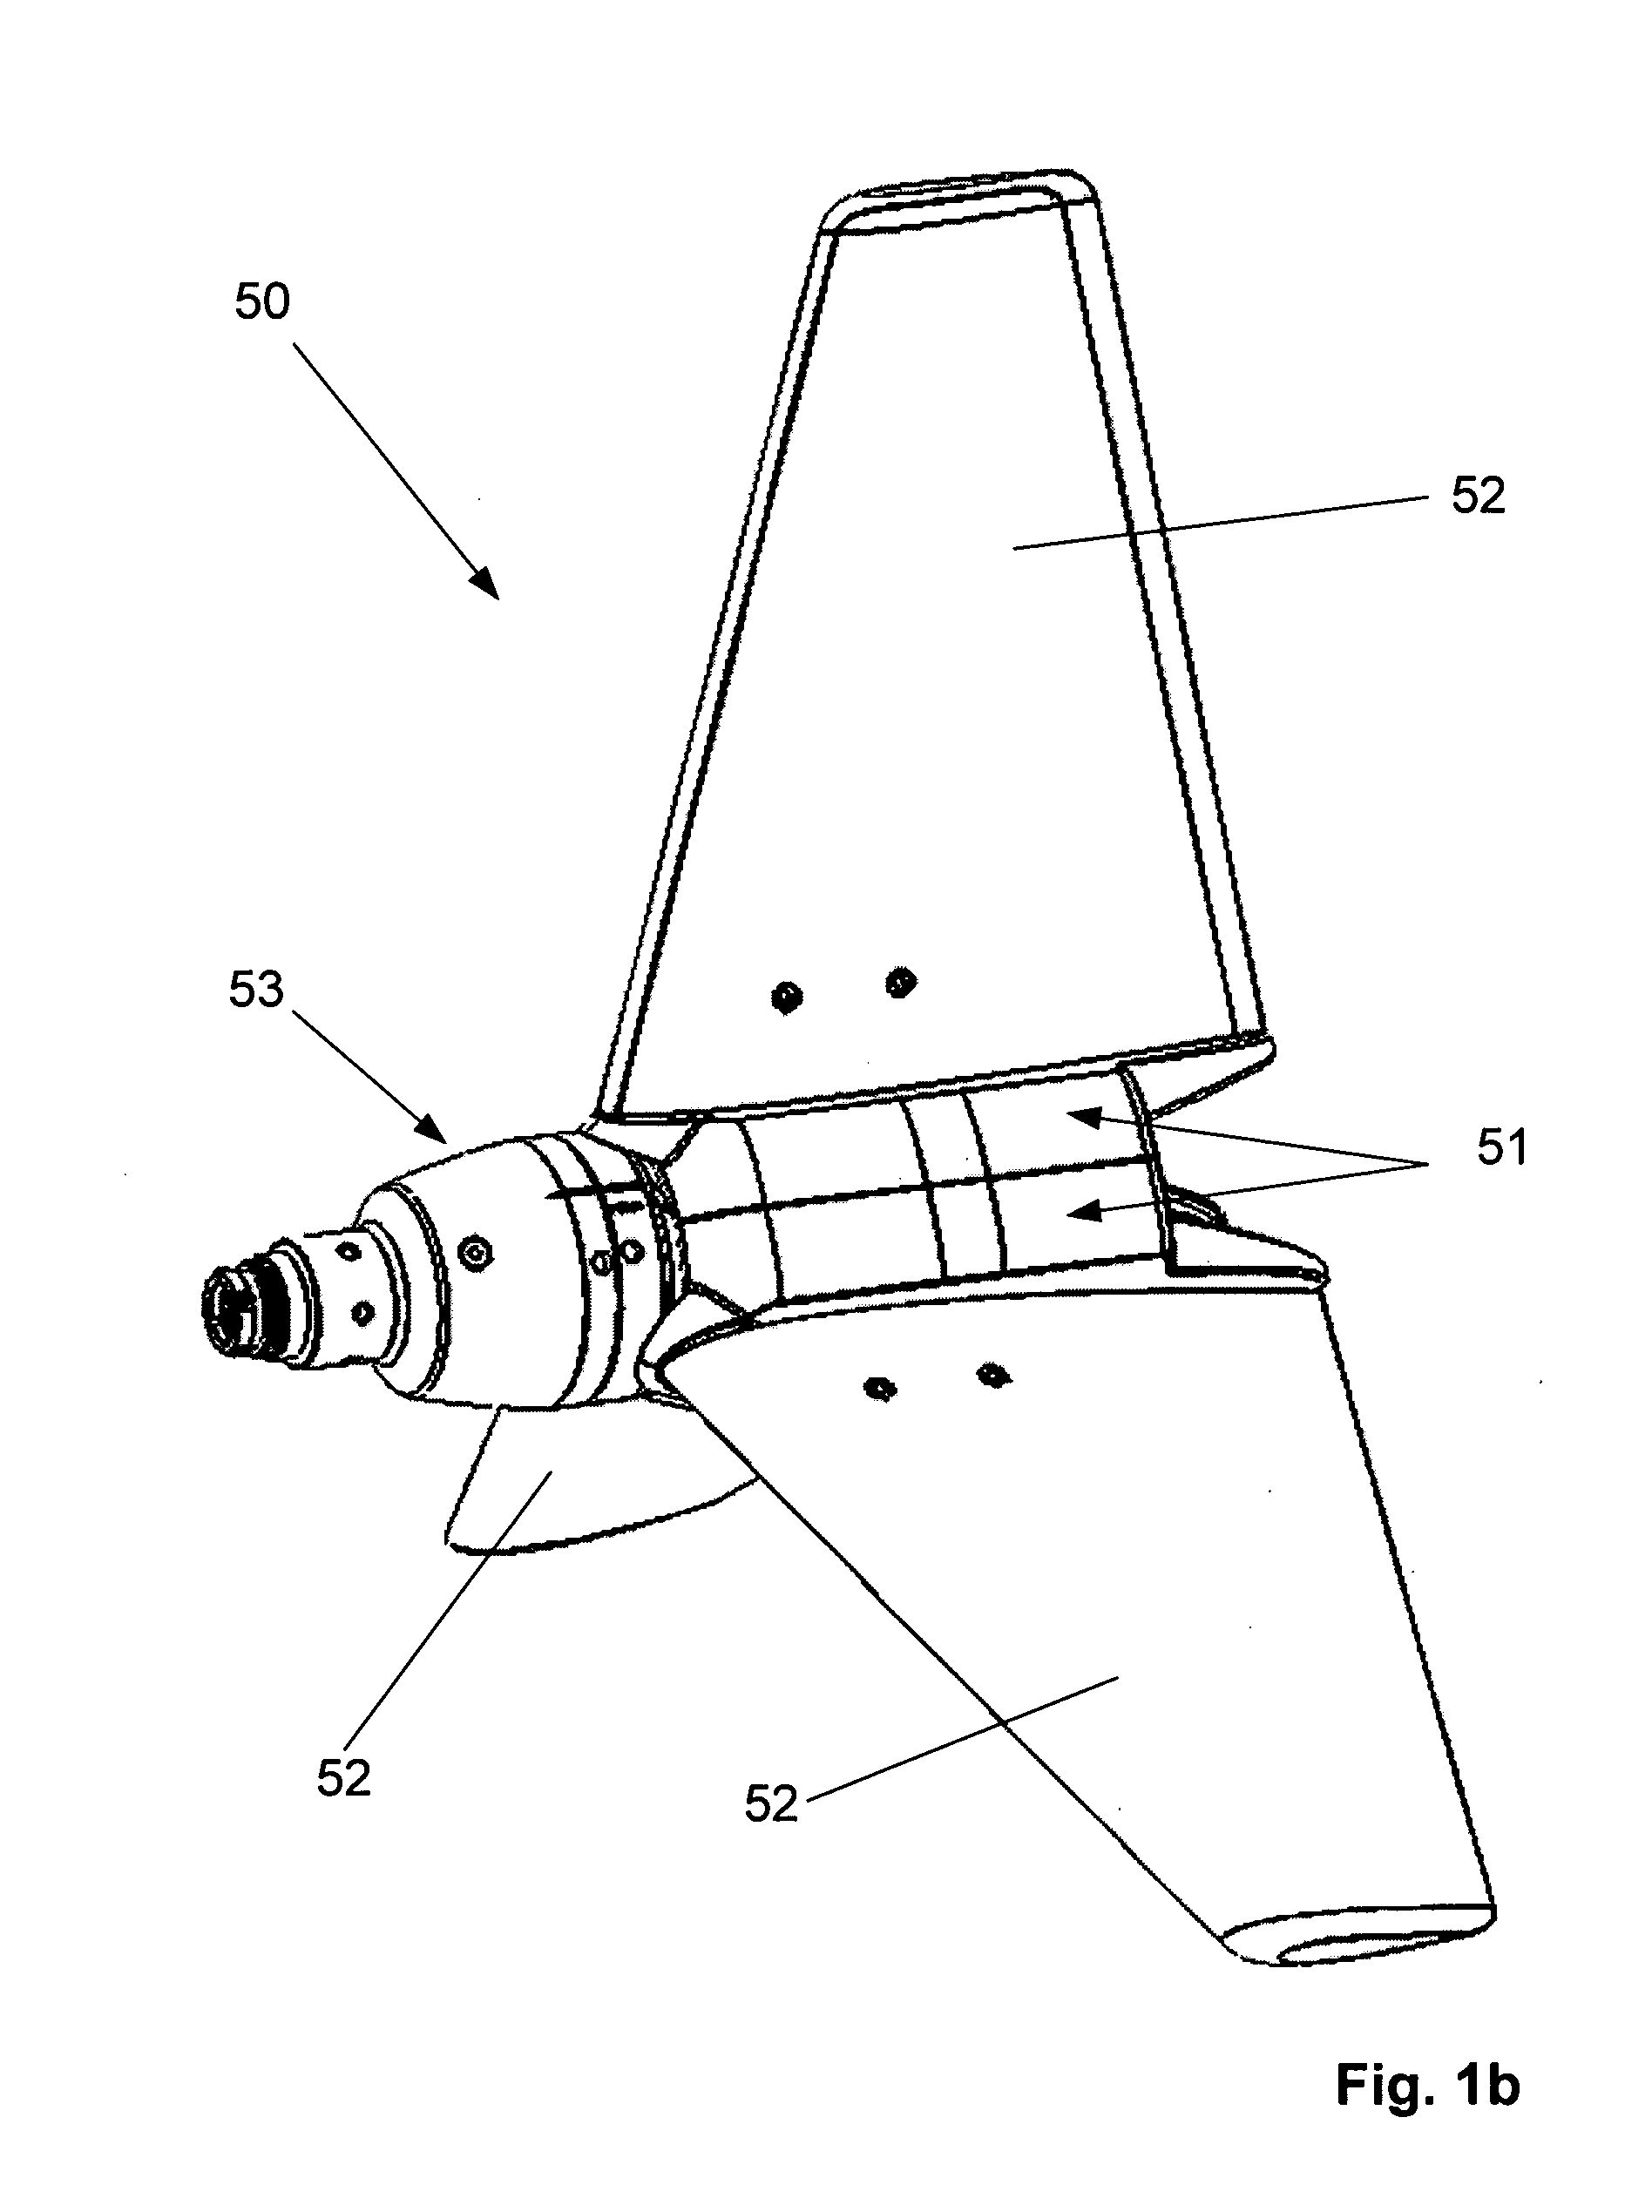 Control device for positioning an instrumented cable towed in water